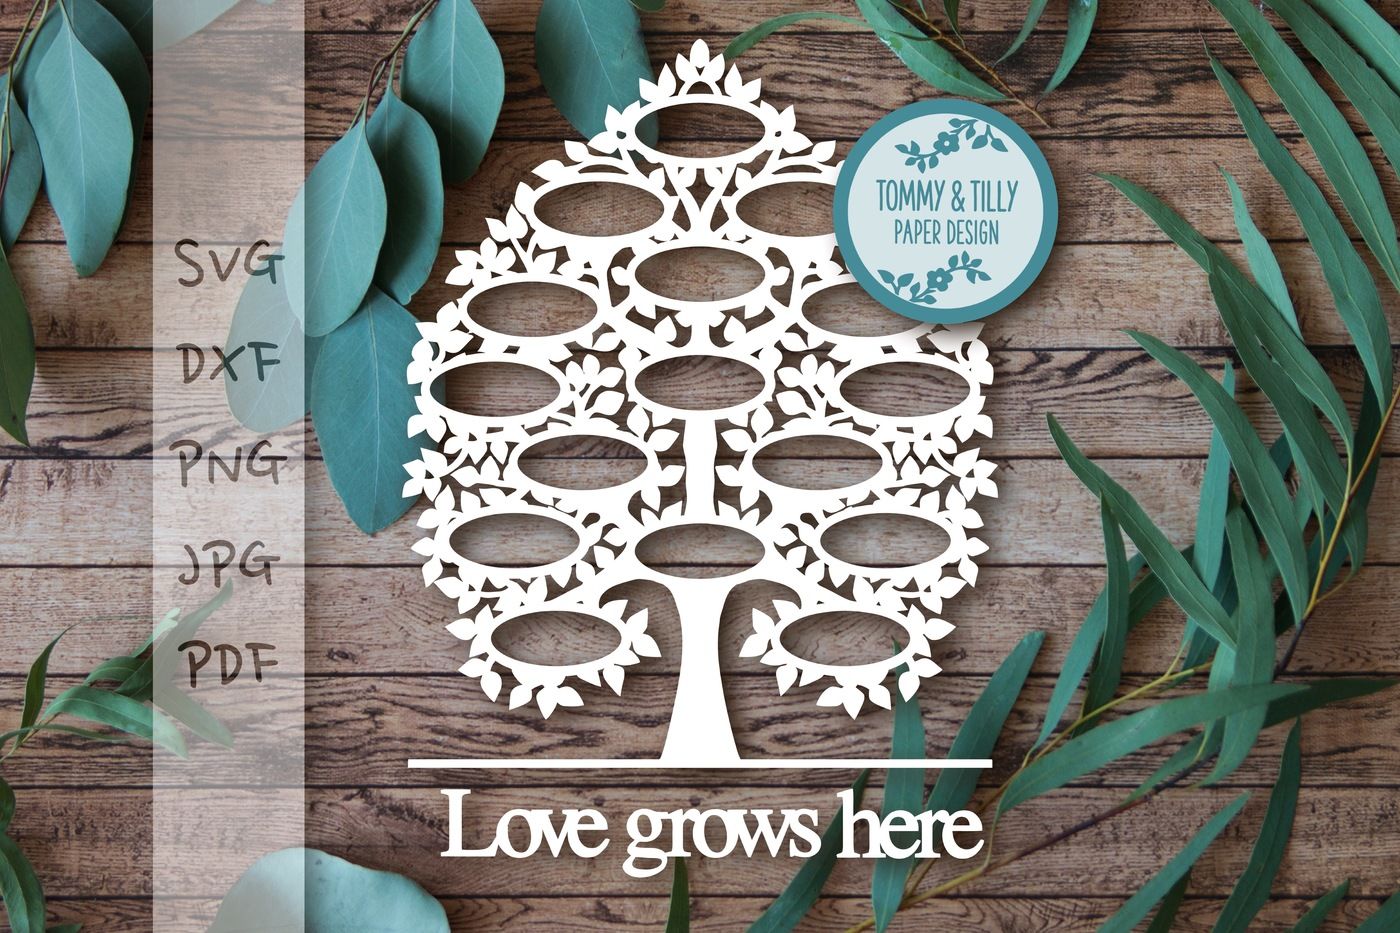 Download 16 Name Family Tree Svg Dxf Png Pdf Jpg By Tommy And Tilly Design Thehungryjpeg Com